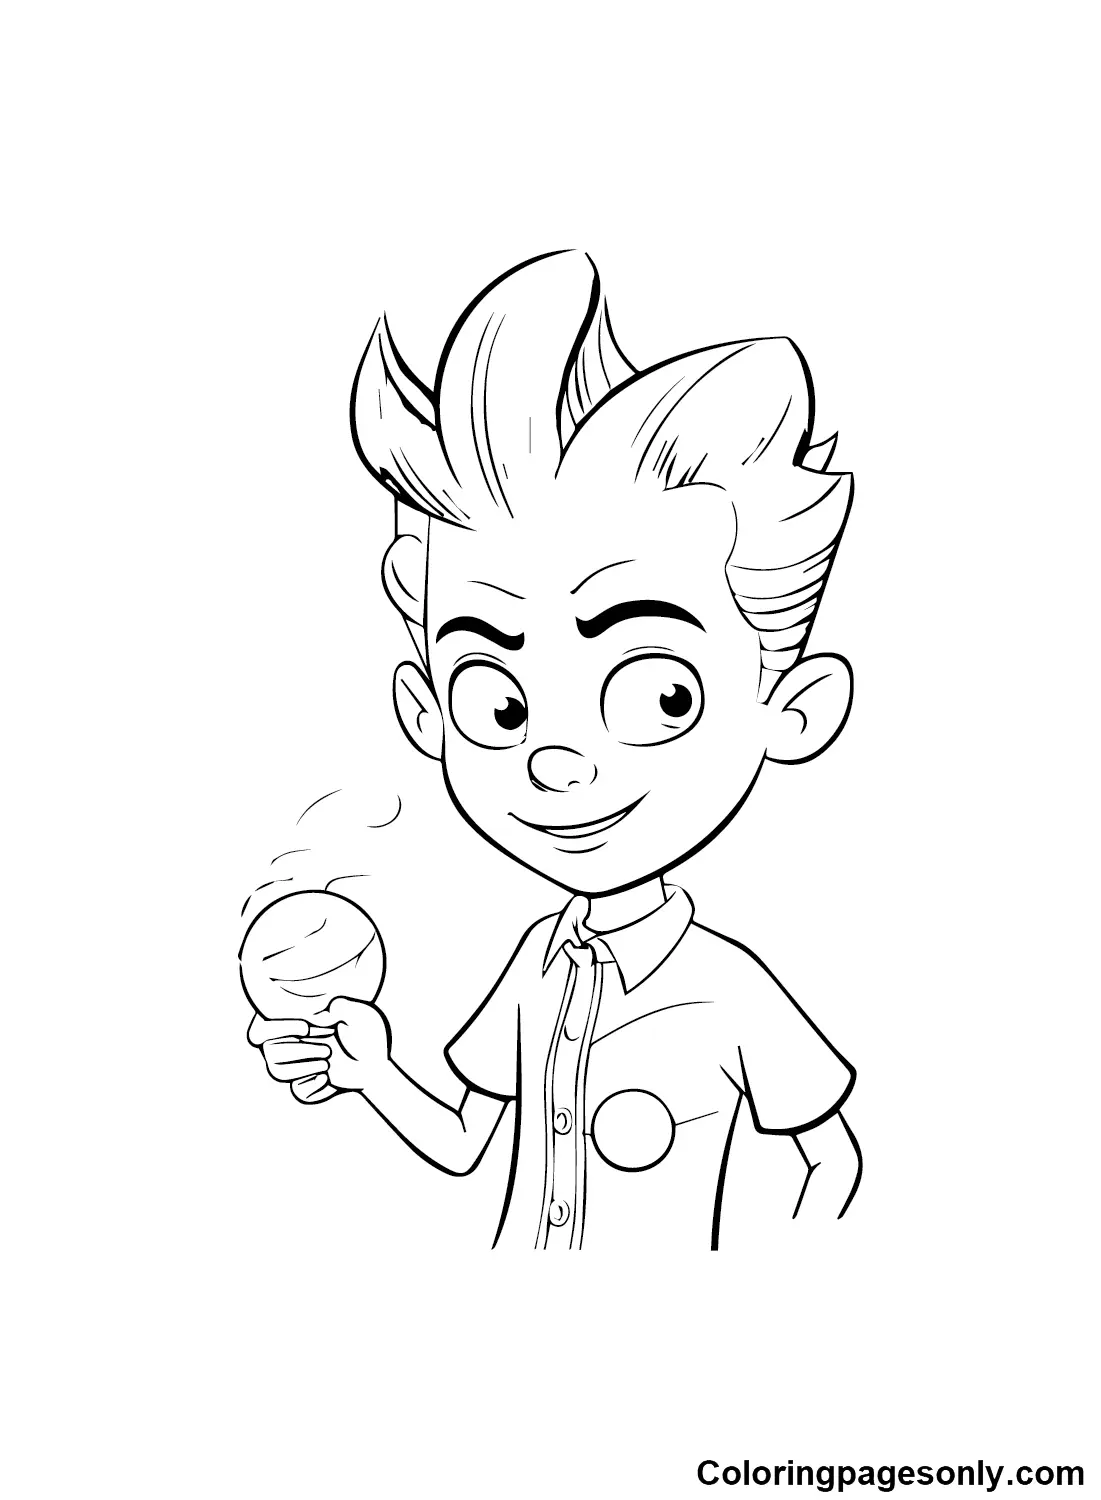 Jimmy Neutron Coloring Pages